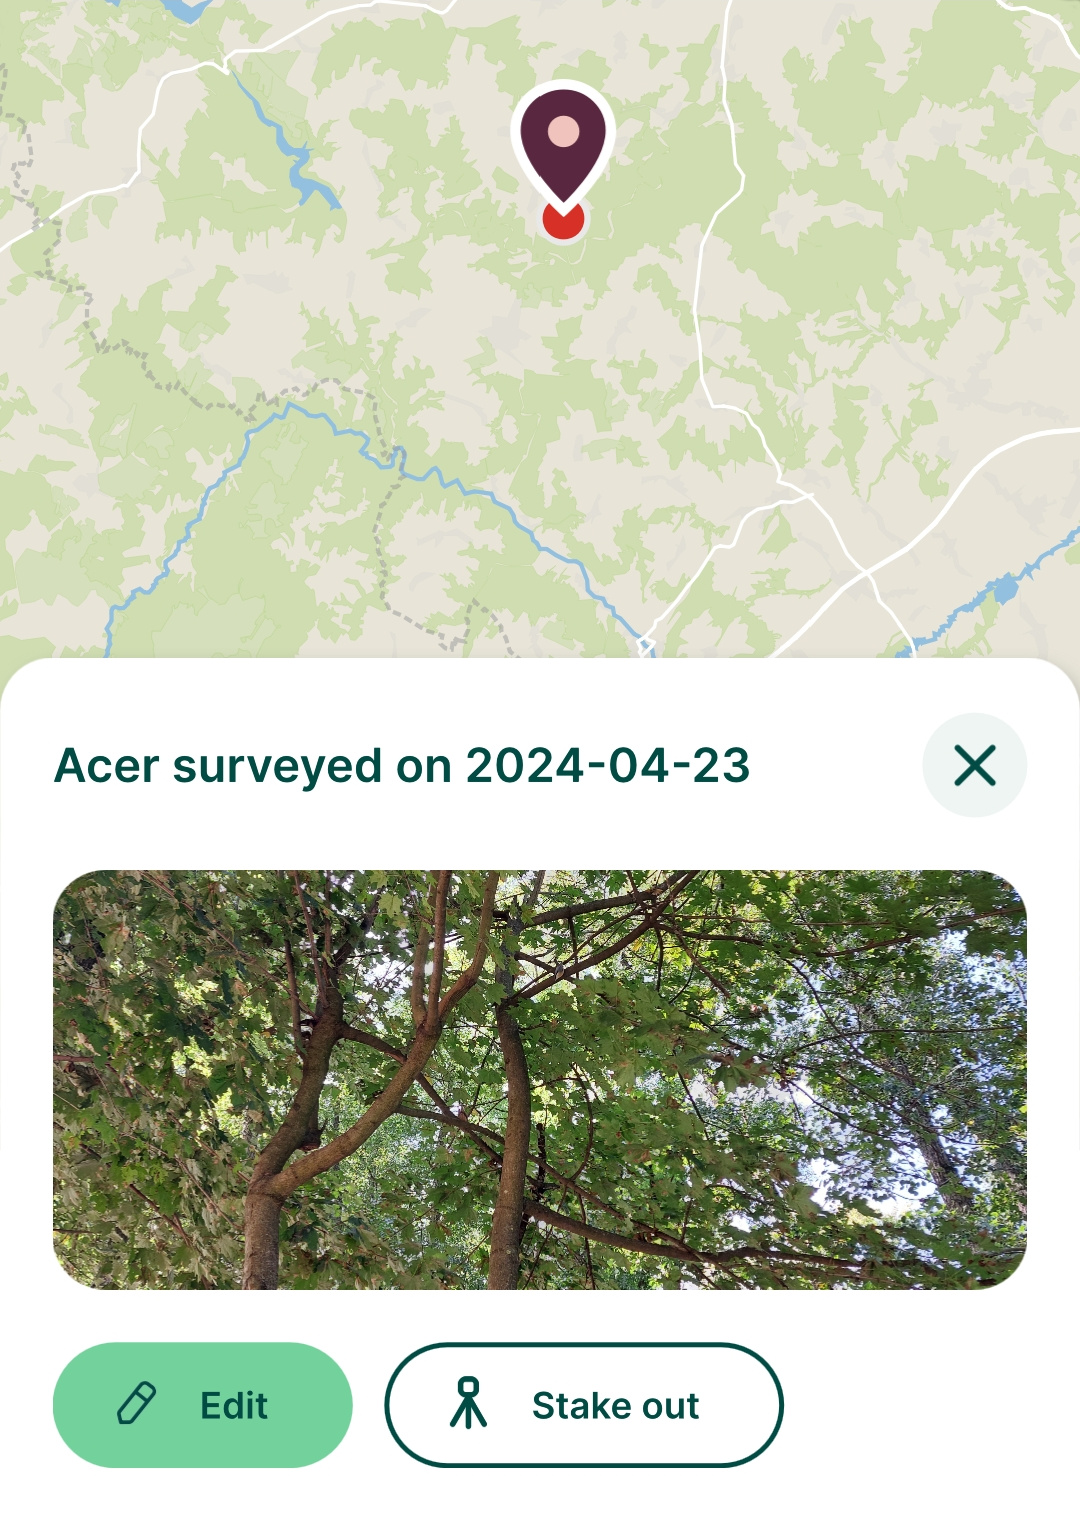 Preview panel in the mobile app based on Display settings in QGIS